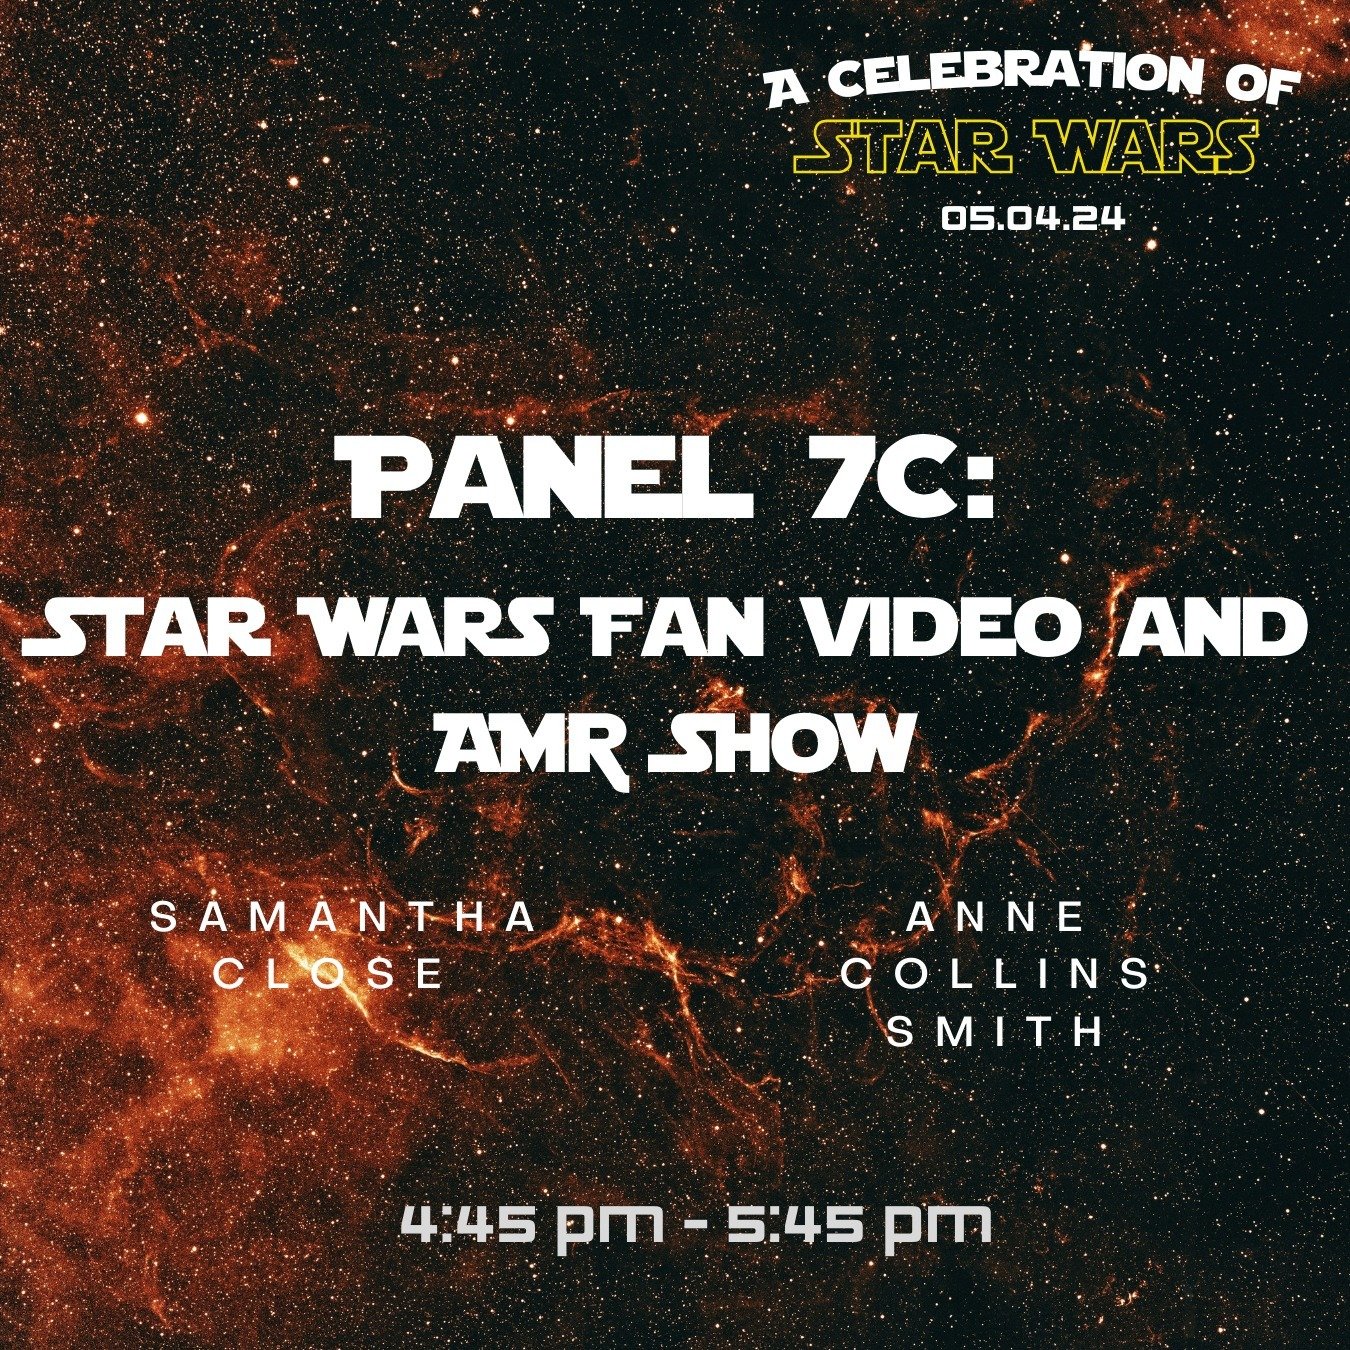 Panel 7C, &ldquo;Star Wars Fan Vid &amp; AMV Show,&rdquo; will be taking place in Room 804 from 4:45 pm - 5:45 pm!